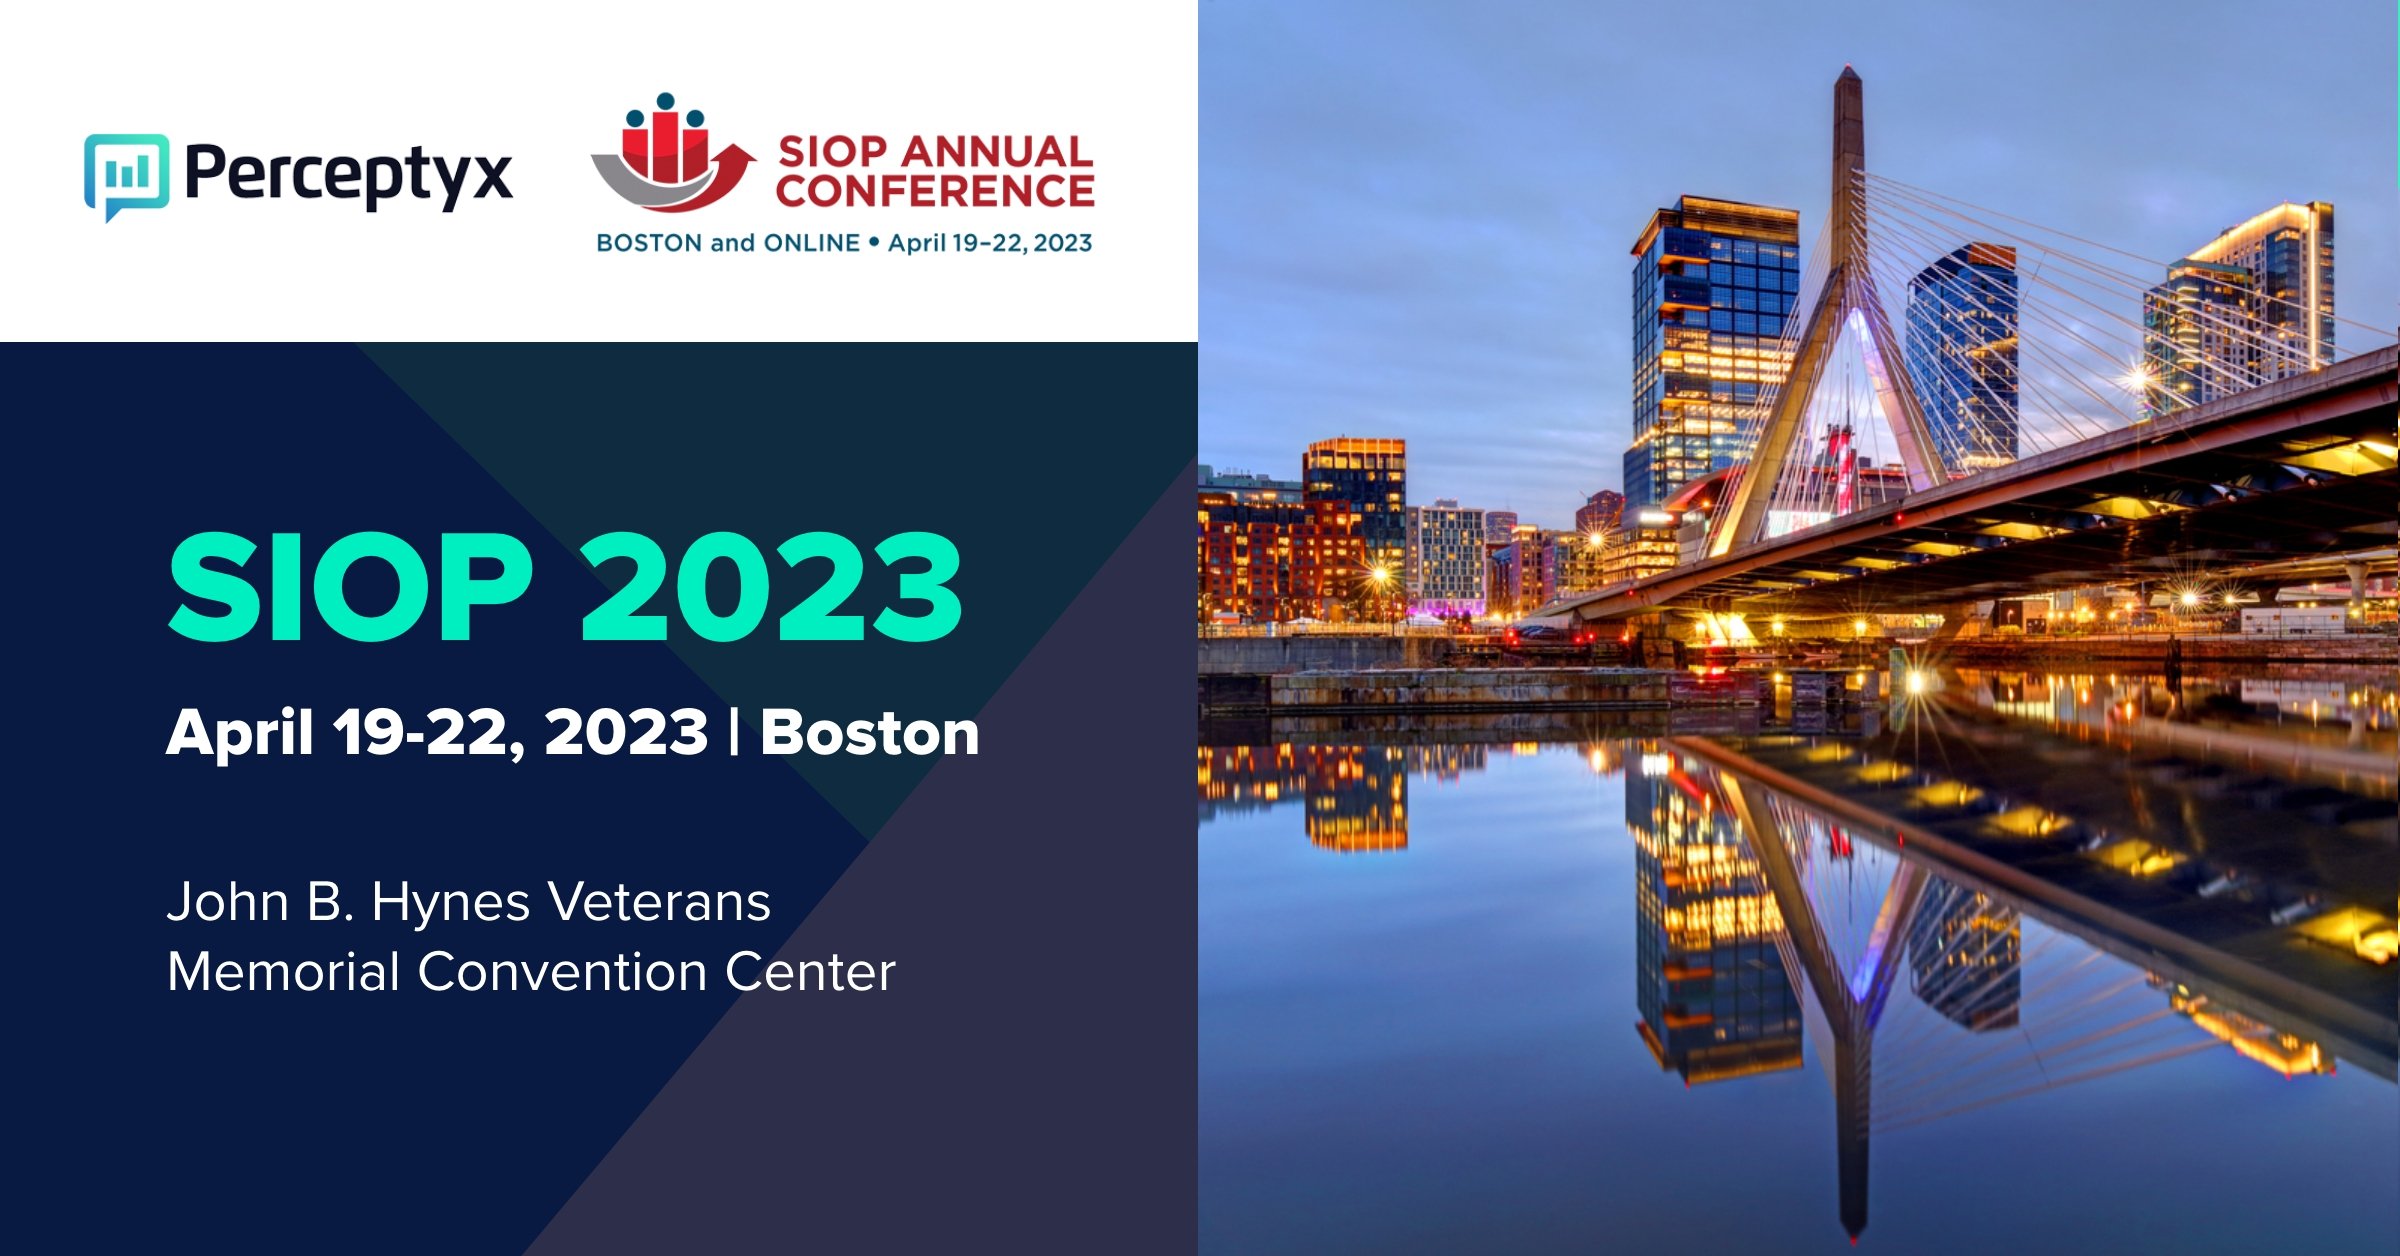 SIOP 2023 Annual Conference with Perceptyx